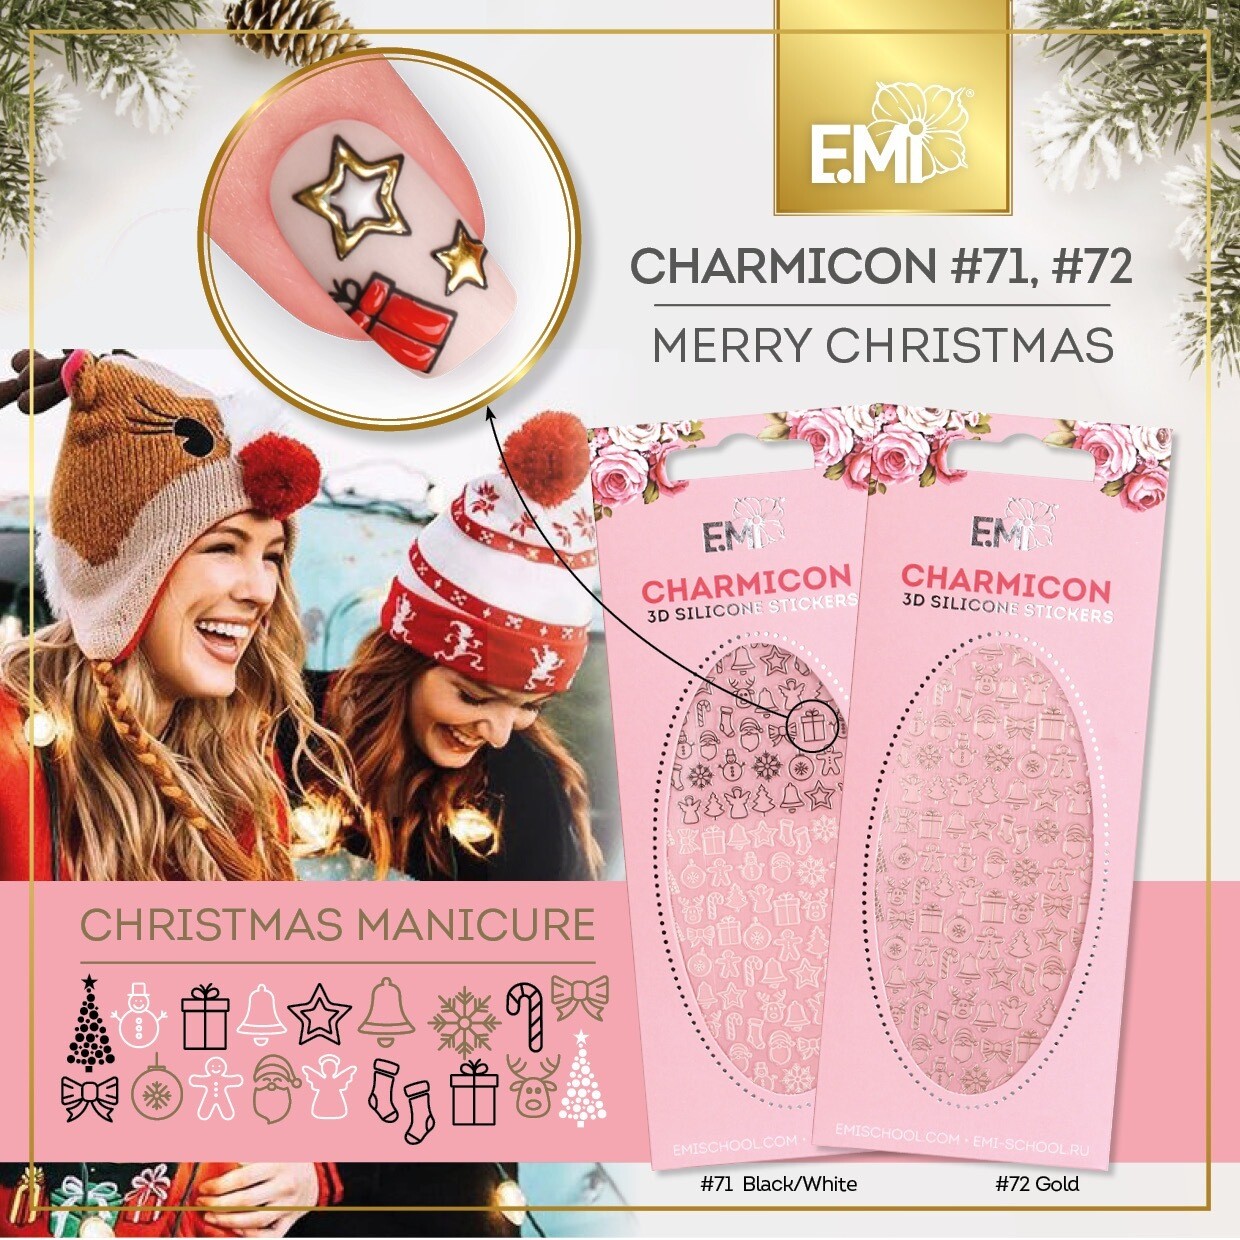 Charmicon Silicone Stickers #72 Merry Christmas GOLD